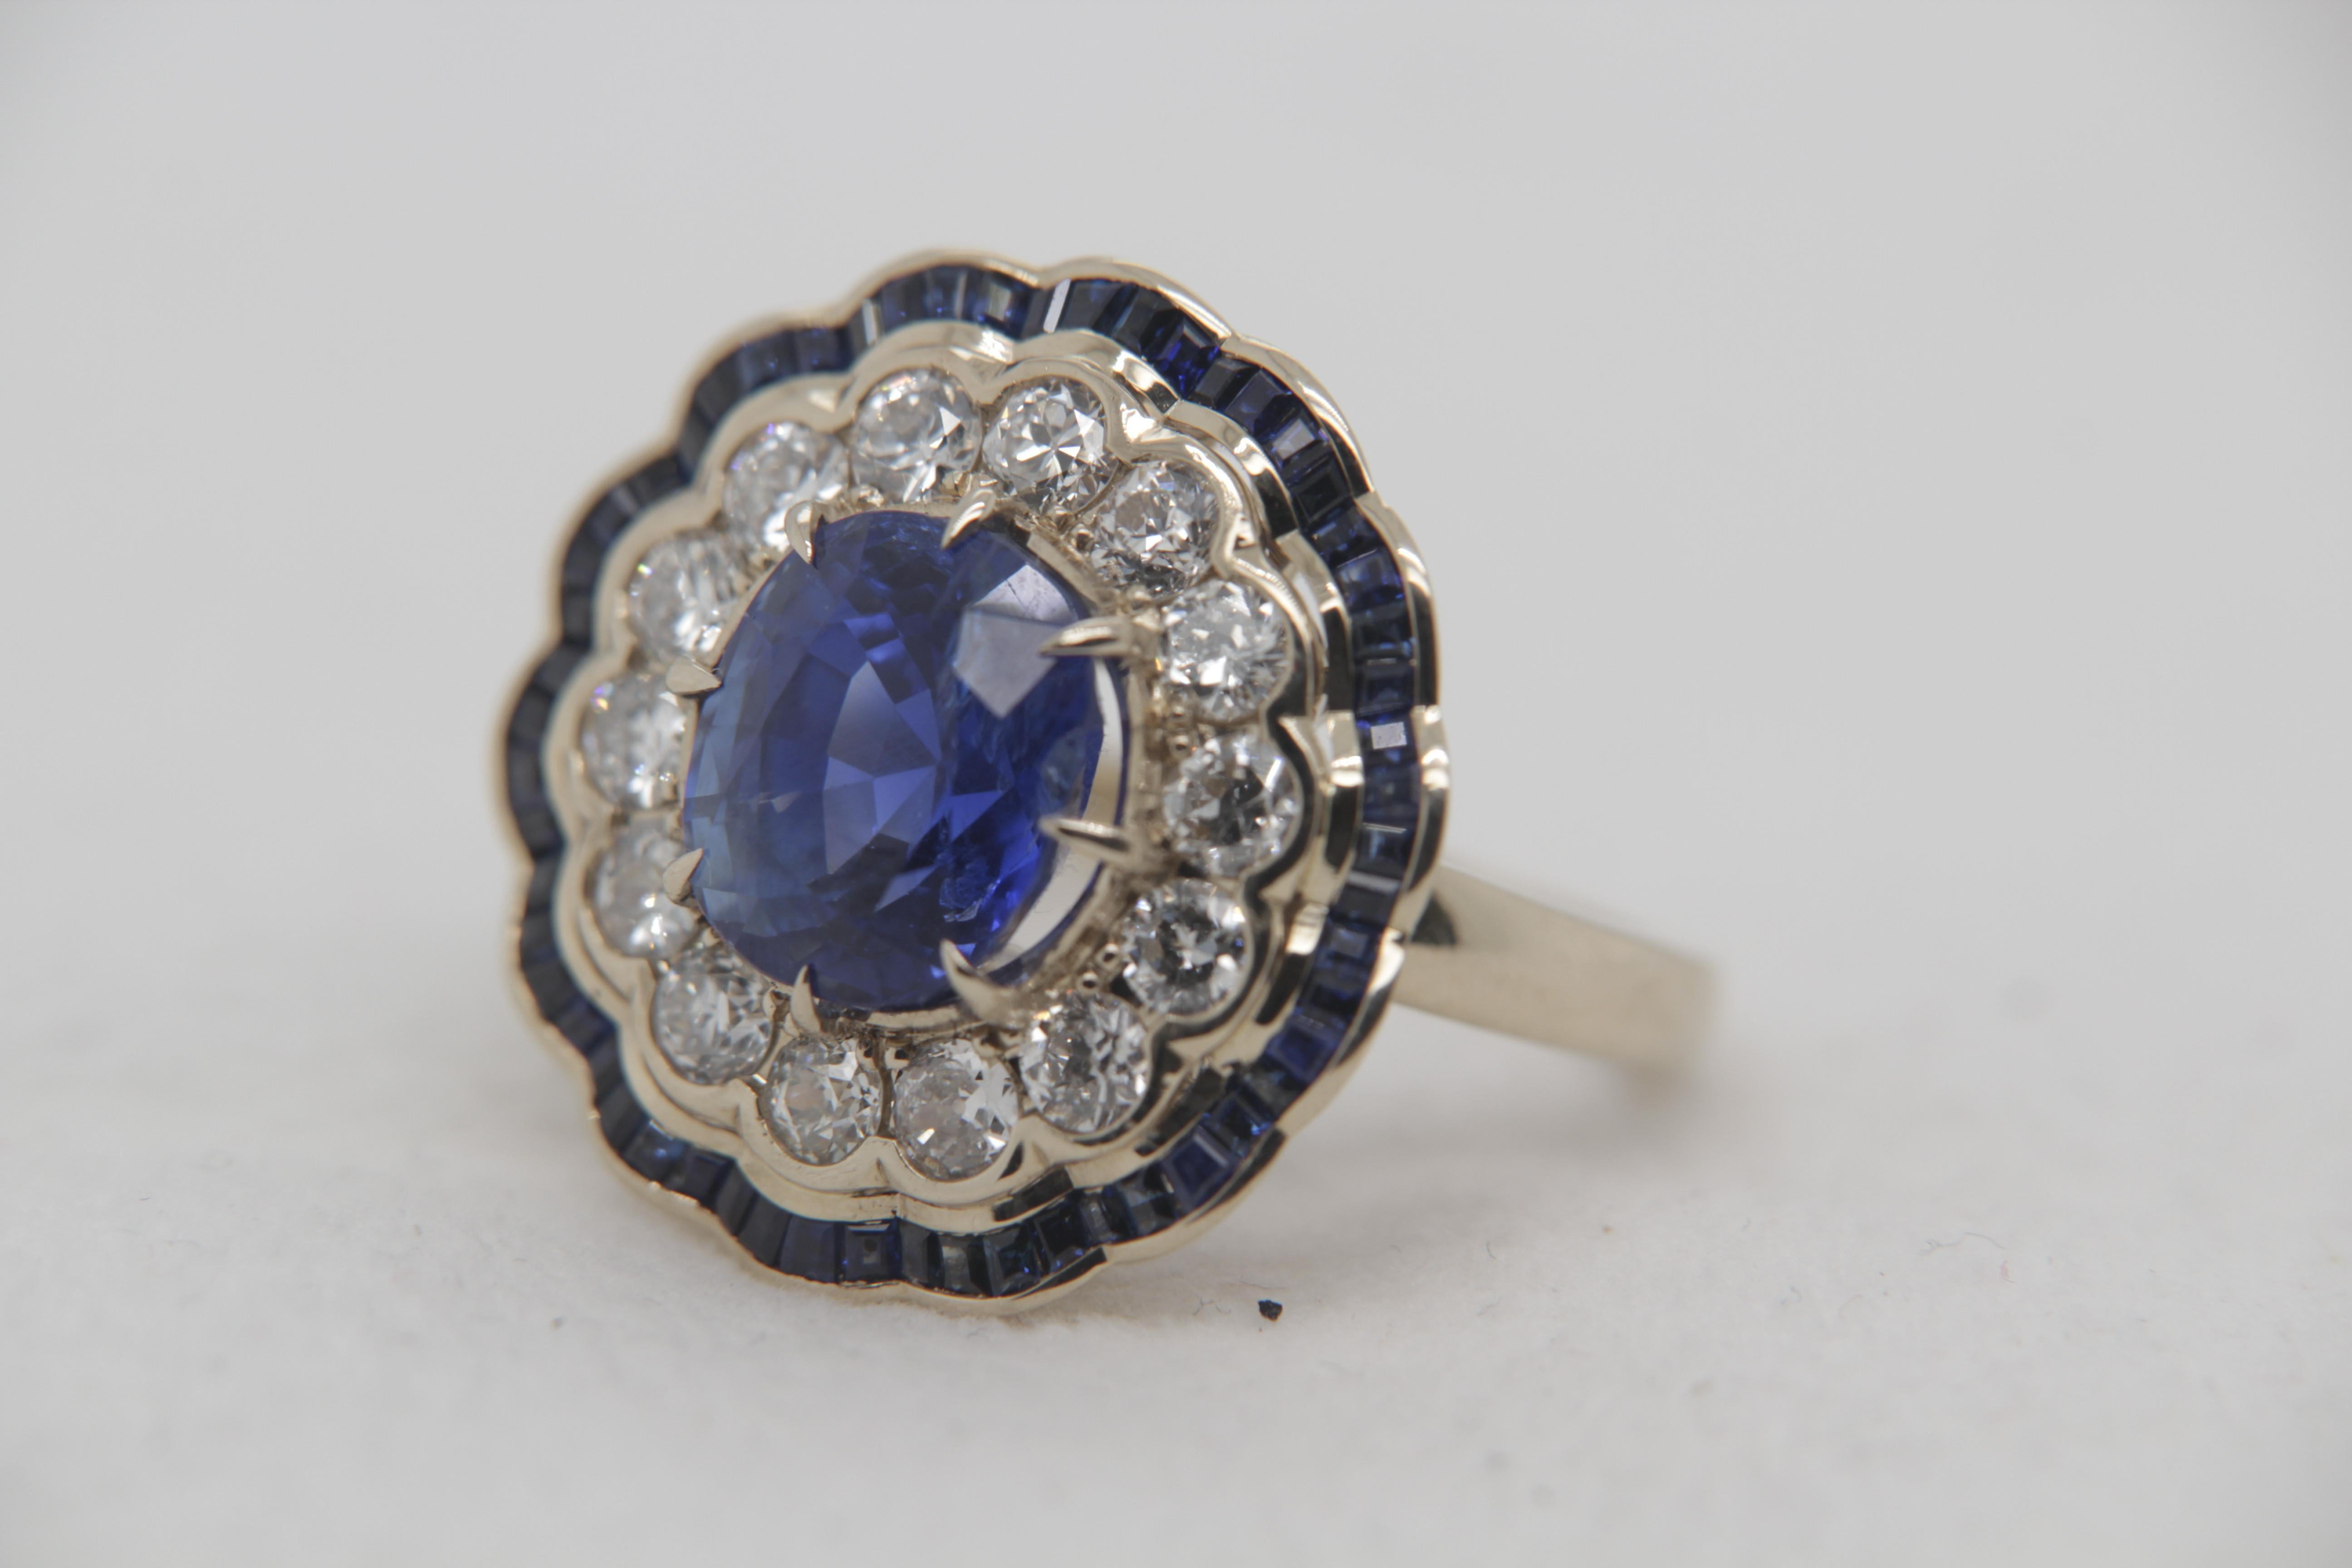 A brand new blue sapphire and diamond ring made in 18 Karat gold. The total diamond weight is 1.57 carat. The blue sapphire center piece weigh is 6.36 and small blue sapphire weigh is 1.19 carat. the whole weight of the ring is 11.65 grams. The ring